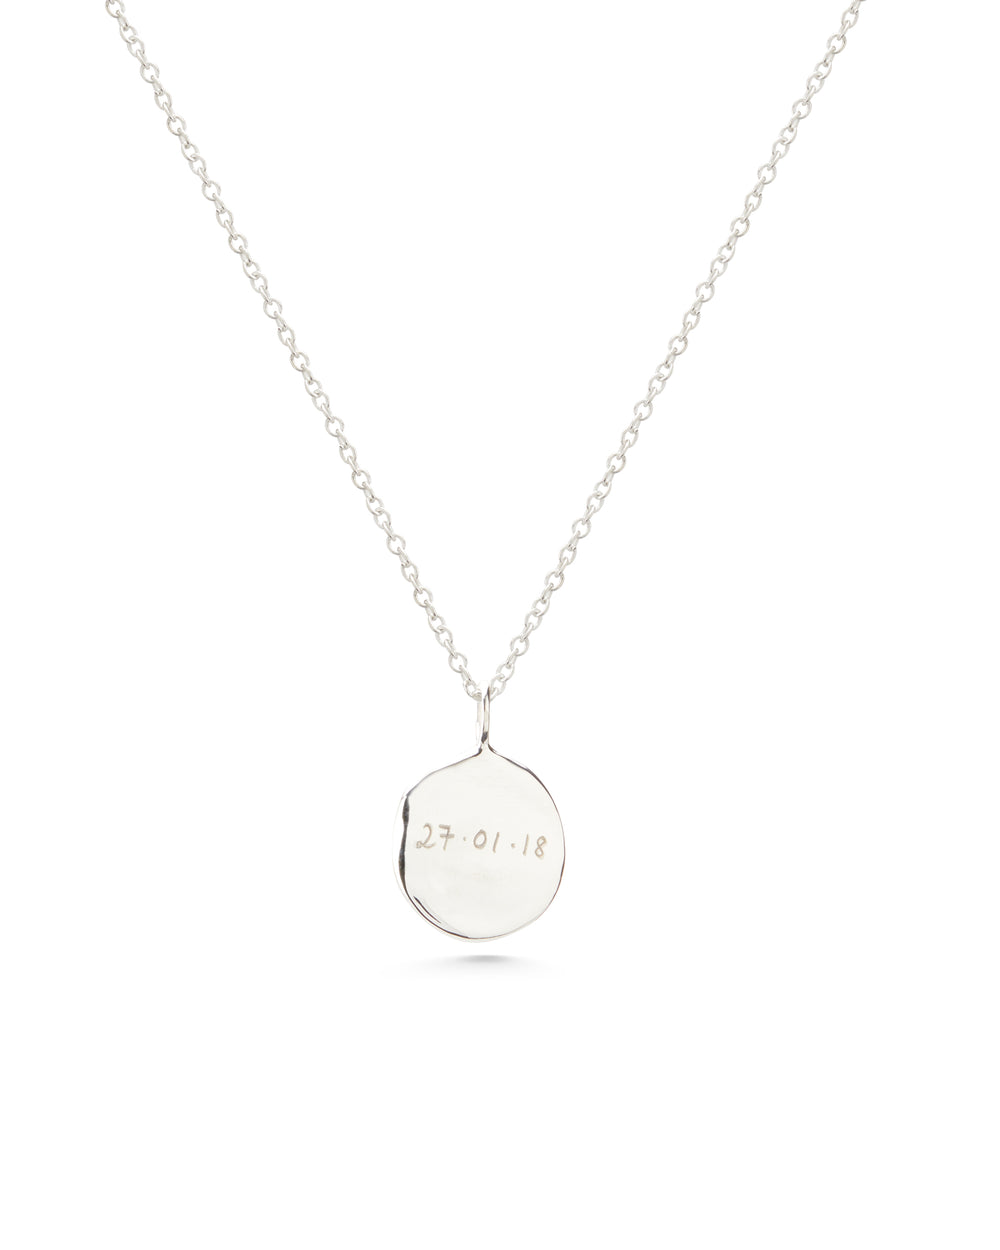 Custom Engraved Necklace | White Gold